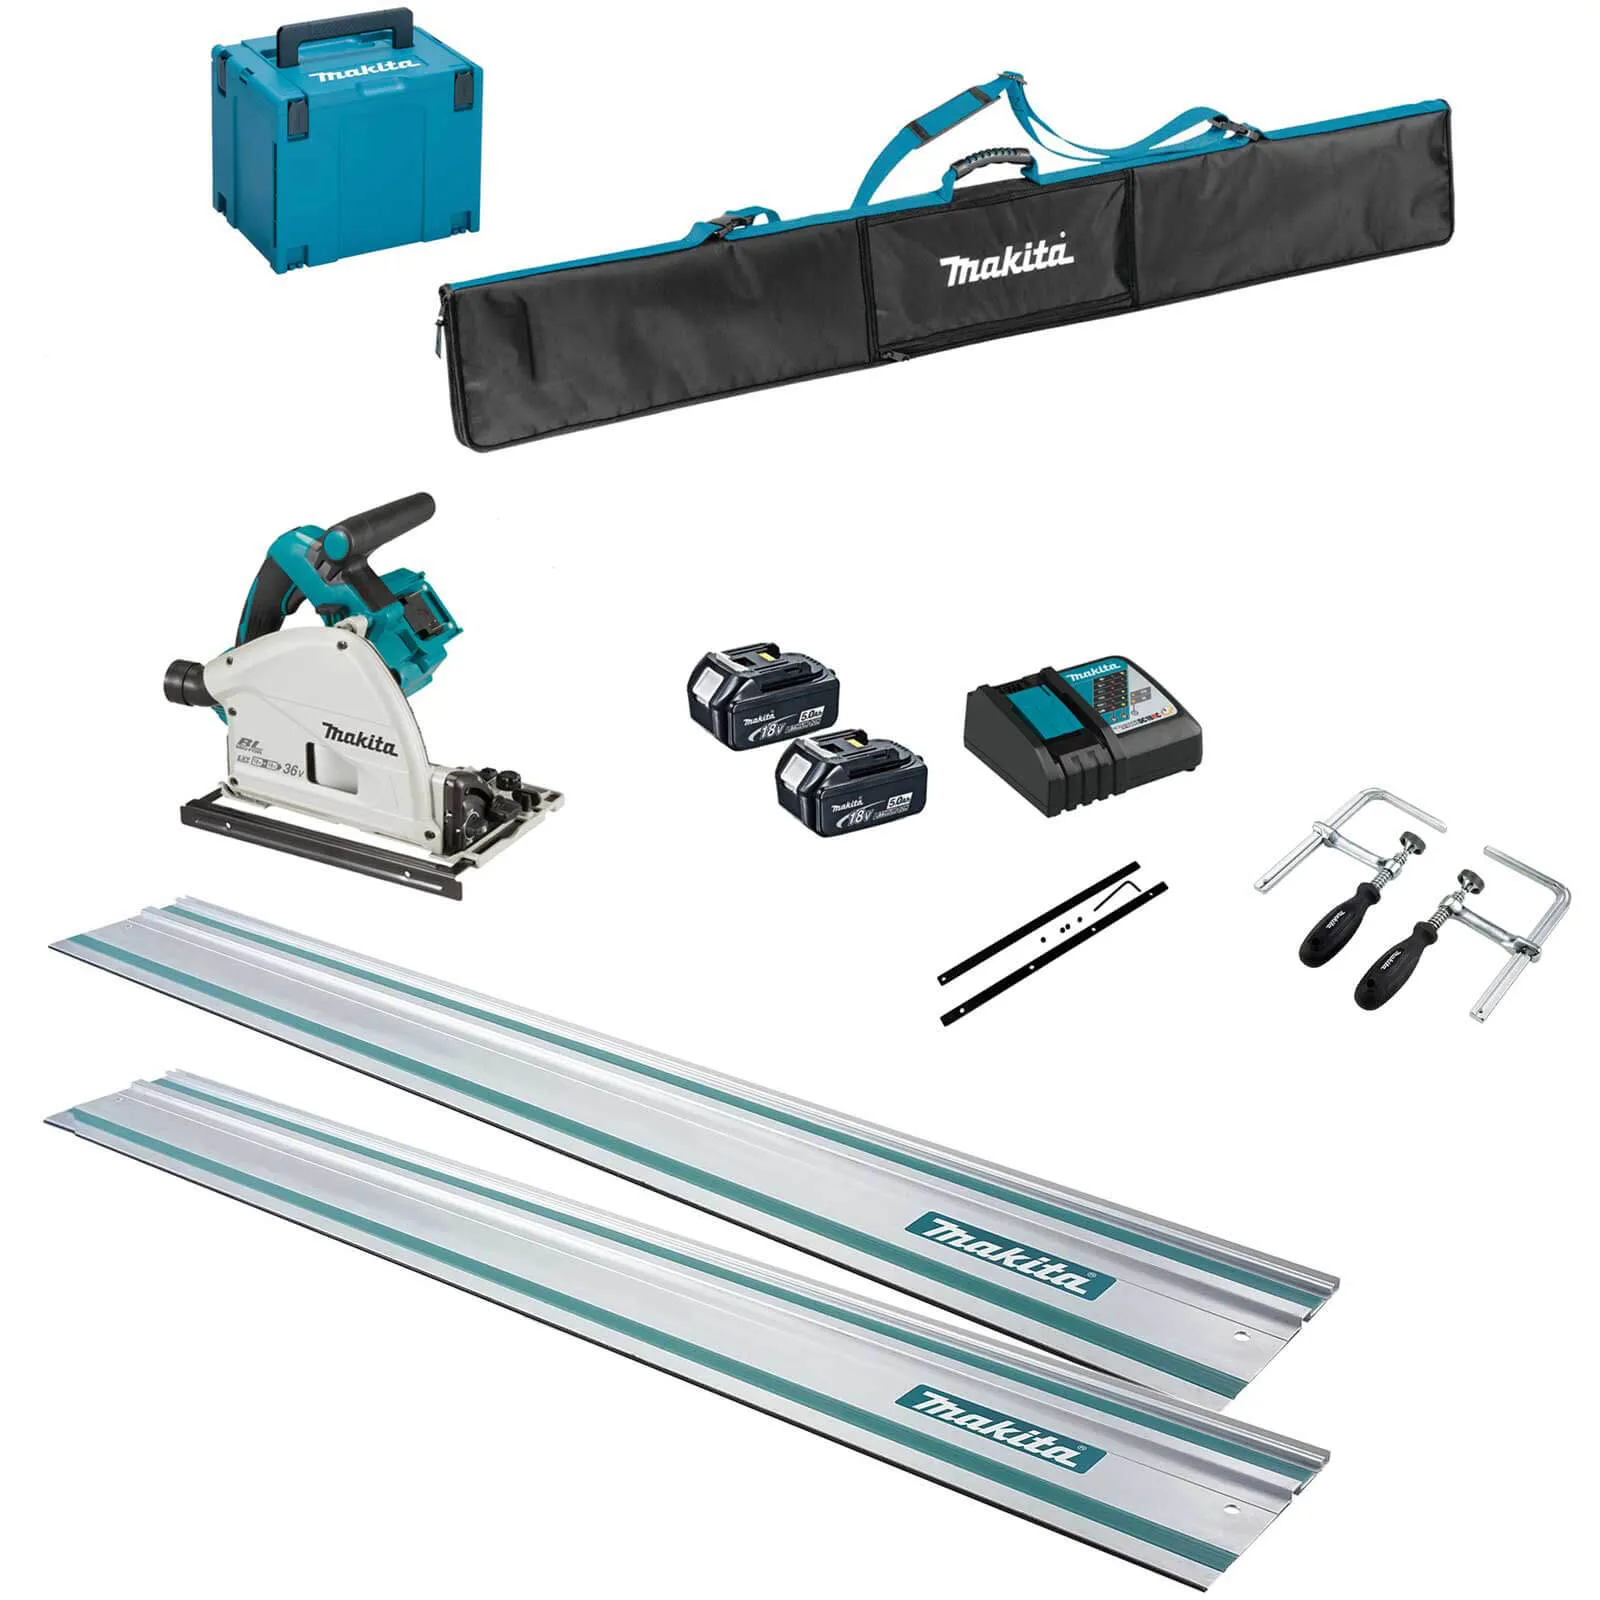 Makita DSP600ZJ Twin 18v LXT Cordless Brushless Plunge Saw 6 Piece Kit - 2 x 5ah Li-ion, Charger, Case & Accessories